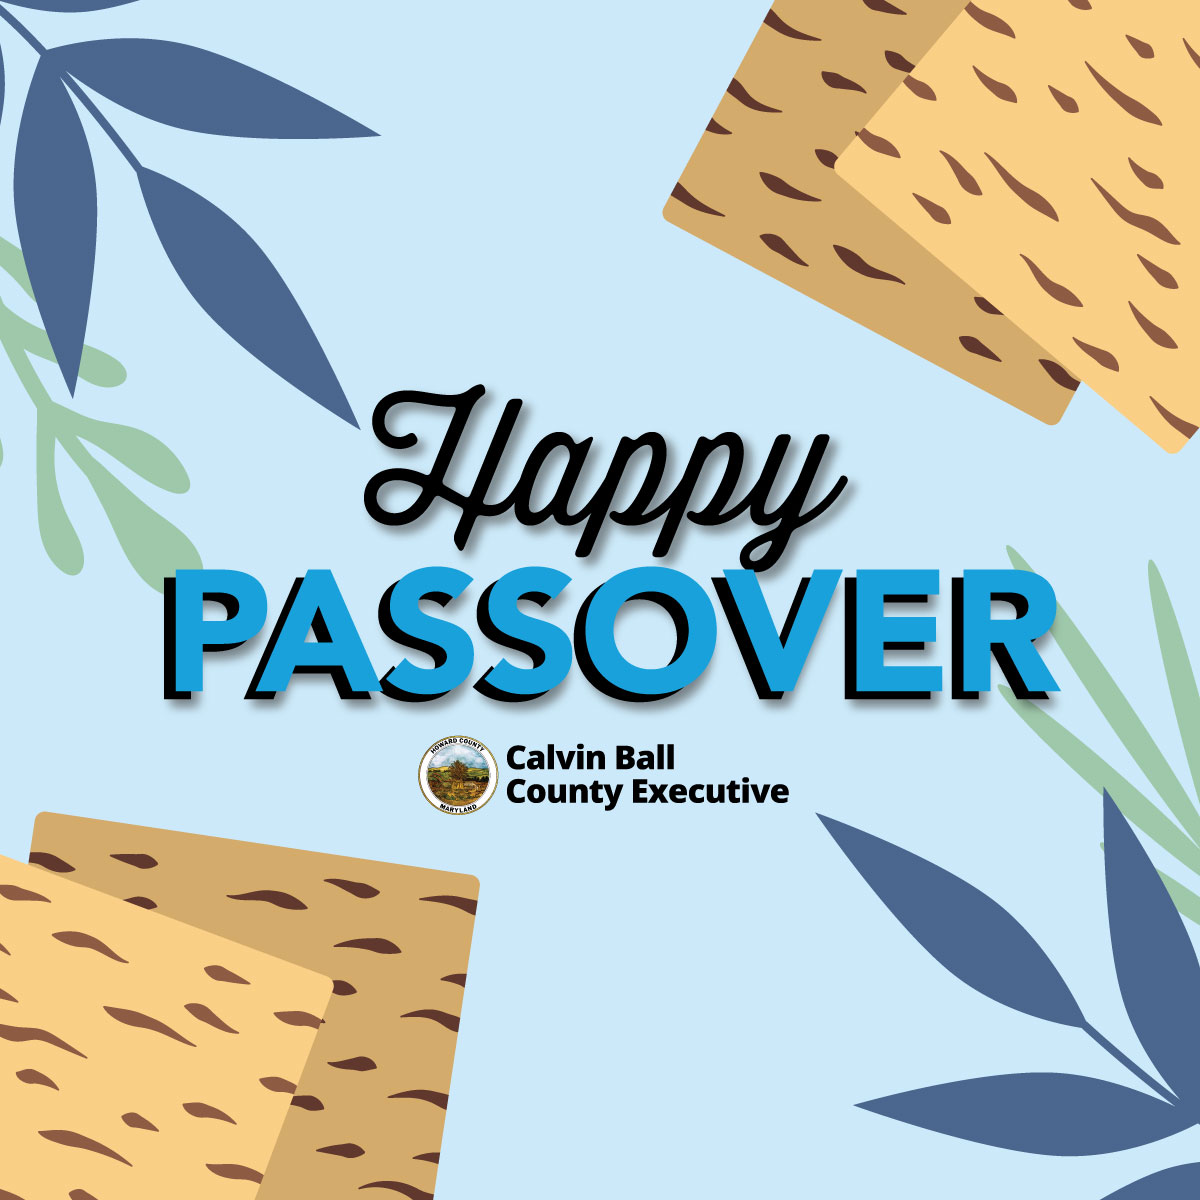 As Passover begins tonight, I am sending best wishes for a blessed celebration. This holiday reminds us that even in the face of persecution, we can endure and overcome. This powerful message reminds us that even on our darkest days, brighter days are ahead. Chag Sameach!